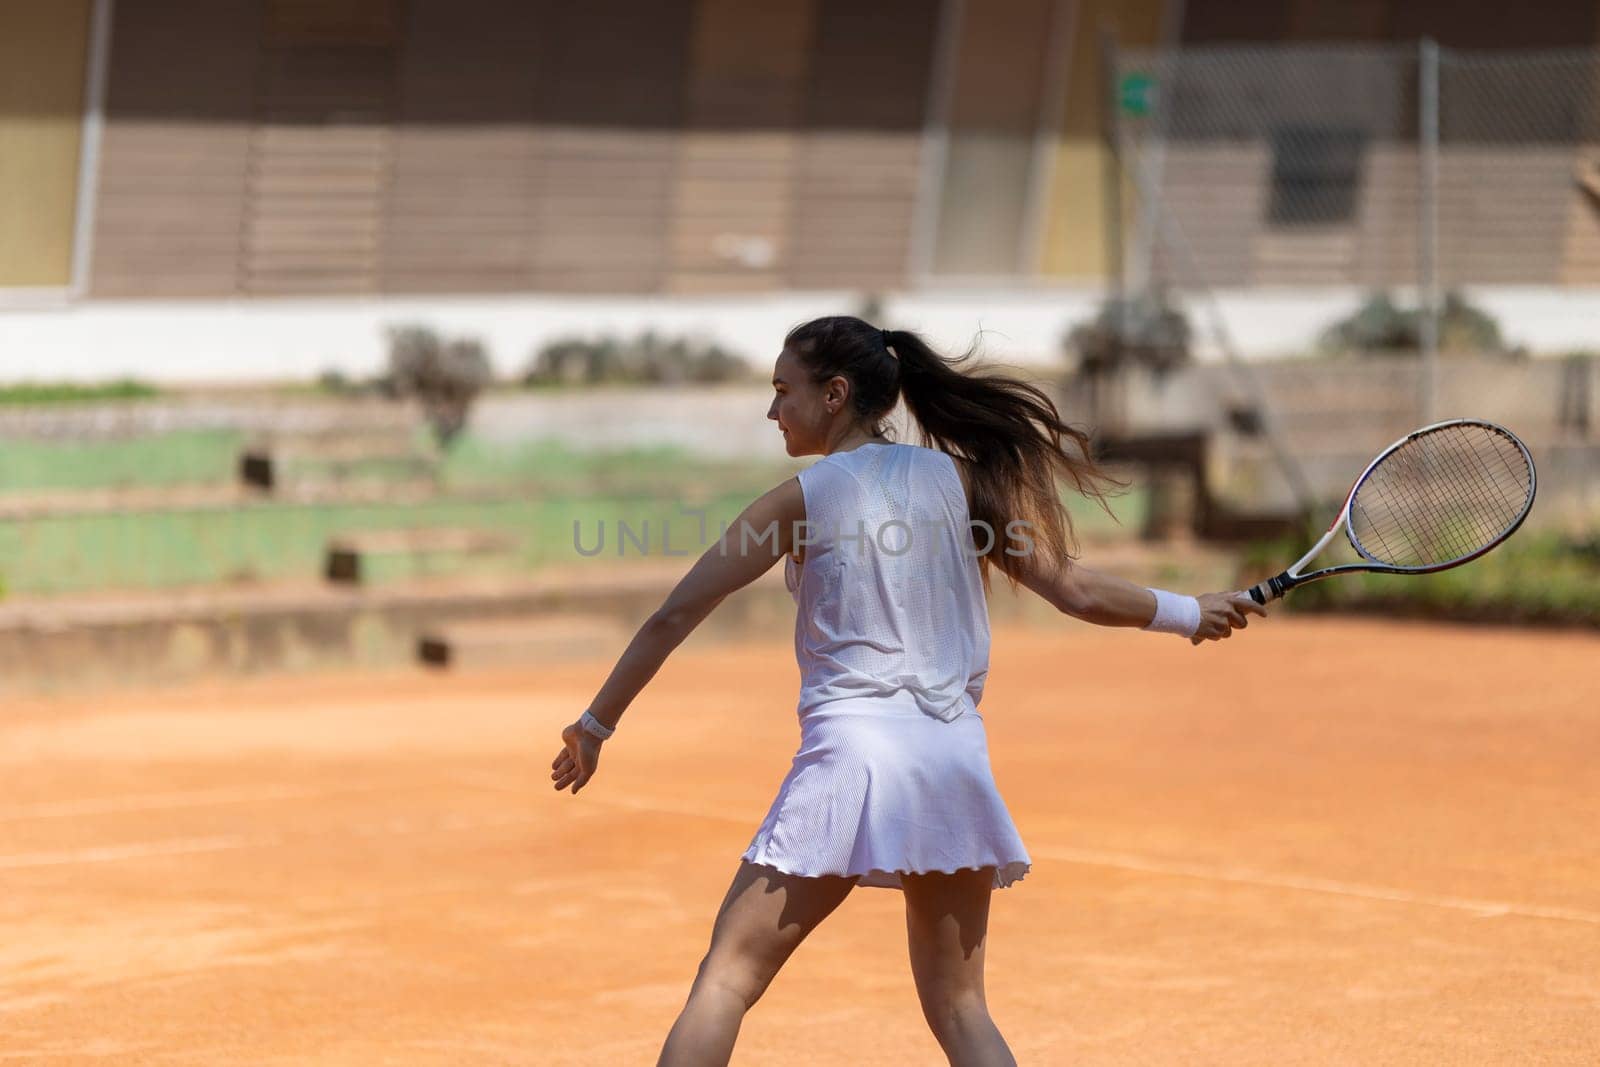 A woman is playing tennis on a clay court. She is wearing a white shirt and skirt and holding a tennis racket